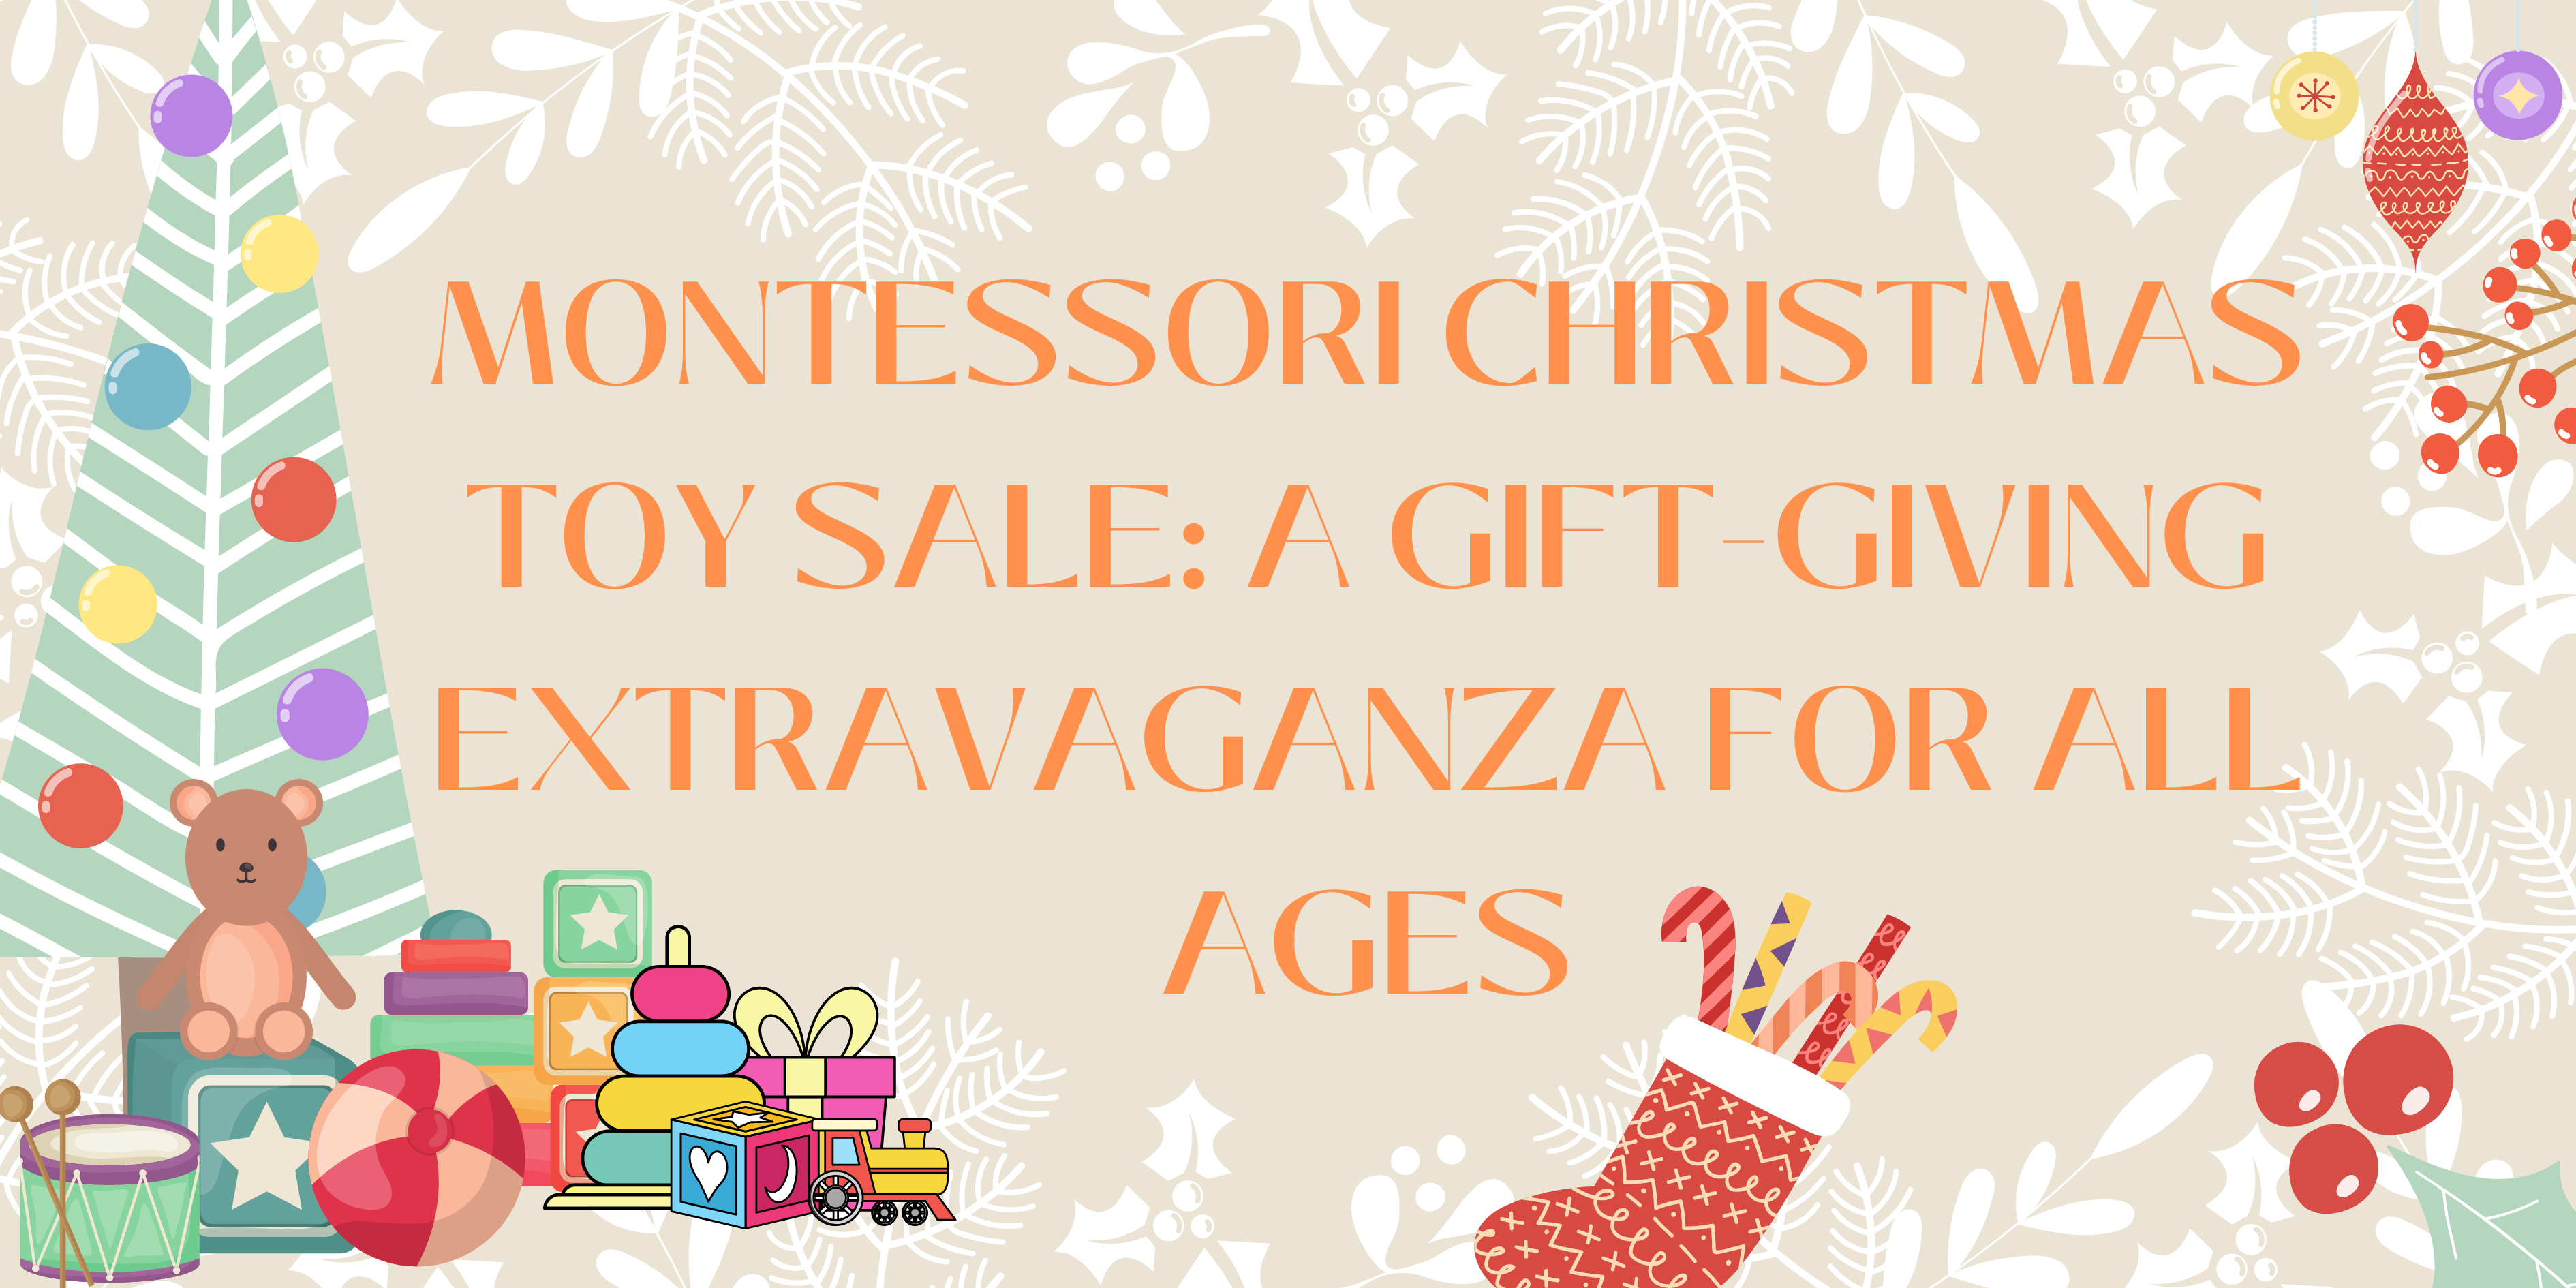 Montessori Christmas Toy Sale: A Gift-Giving Extravaganza for All Ages